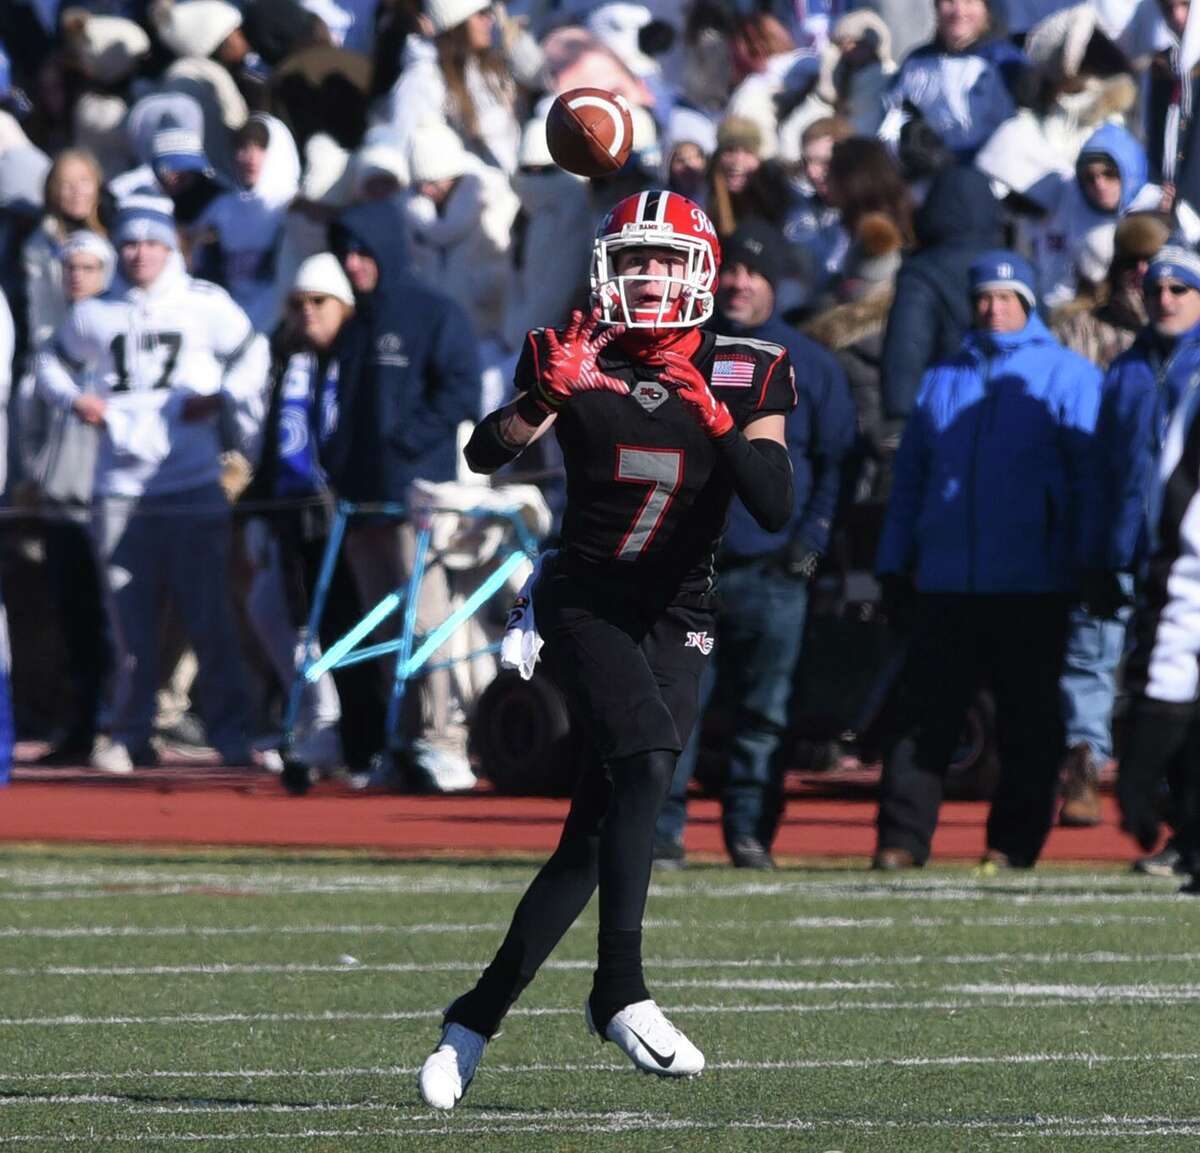 New Canaan's Zach LaPolice (7) makes a reception against Darien during the Turkey Bowl football game at Stamford's Boyle Stadium on Thanksgiving, Nov. 22, 2018.